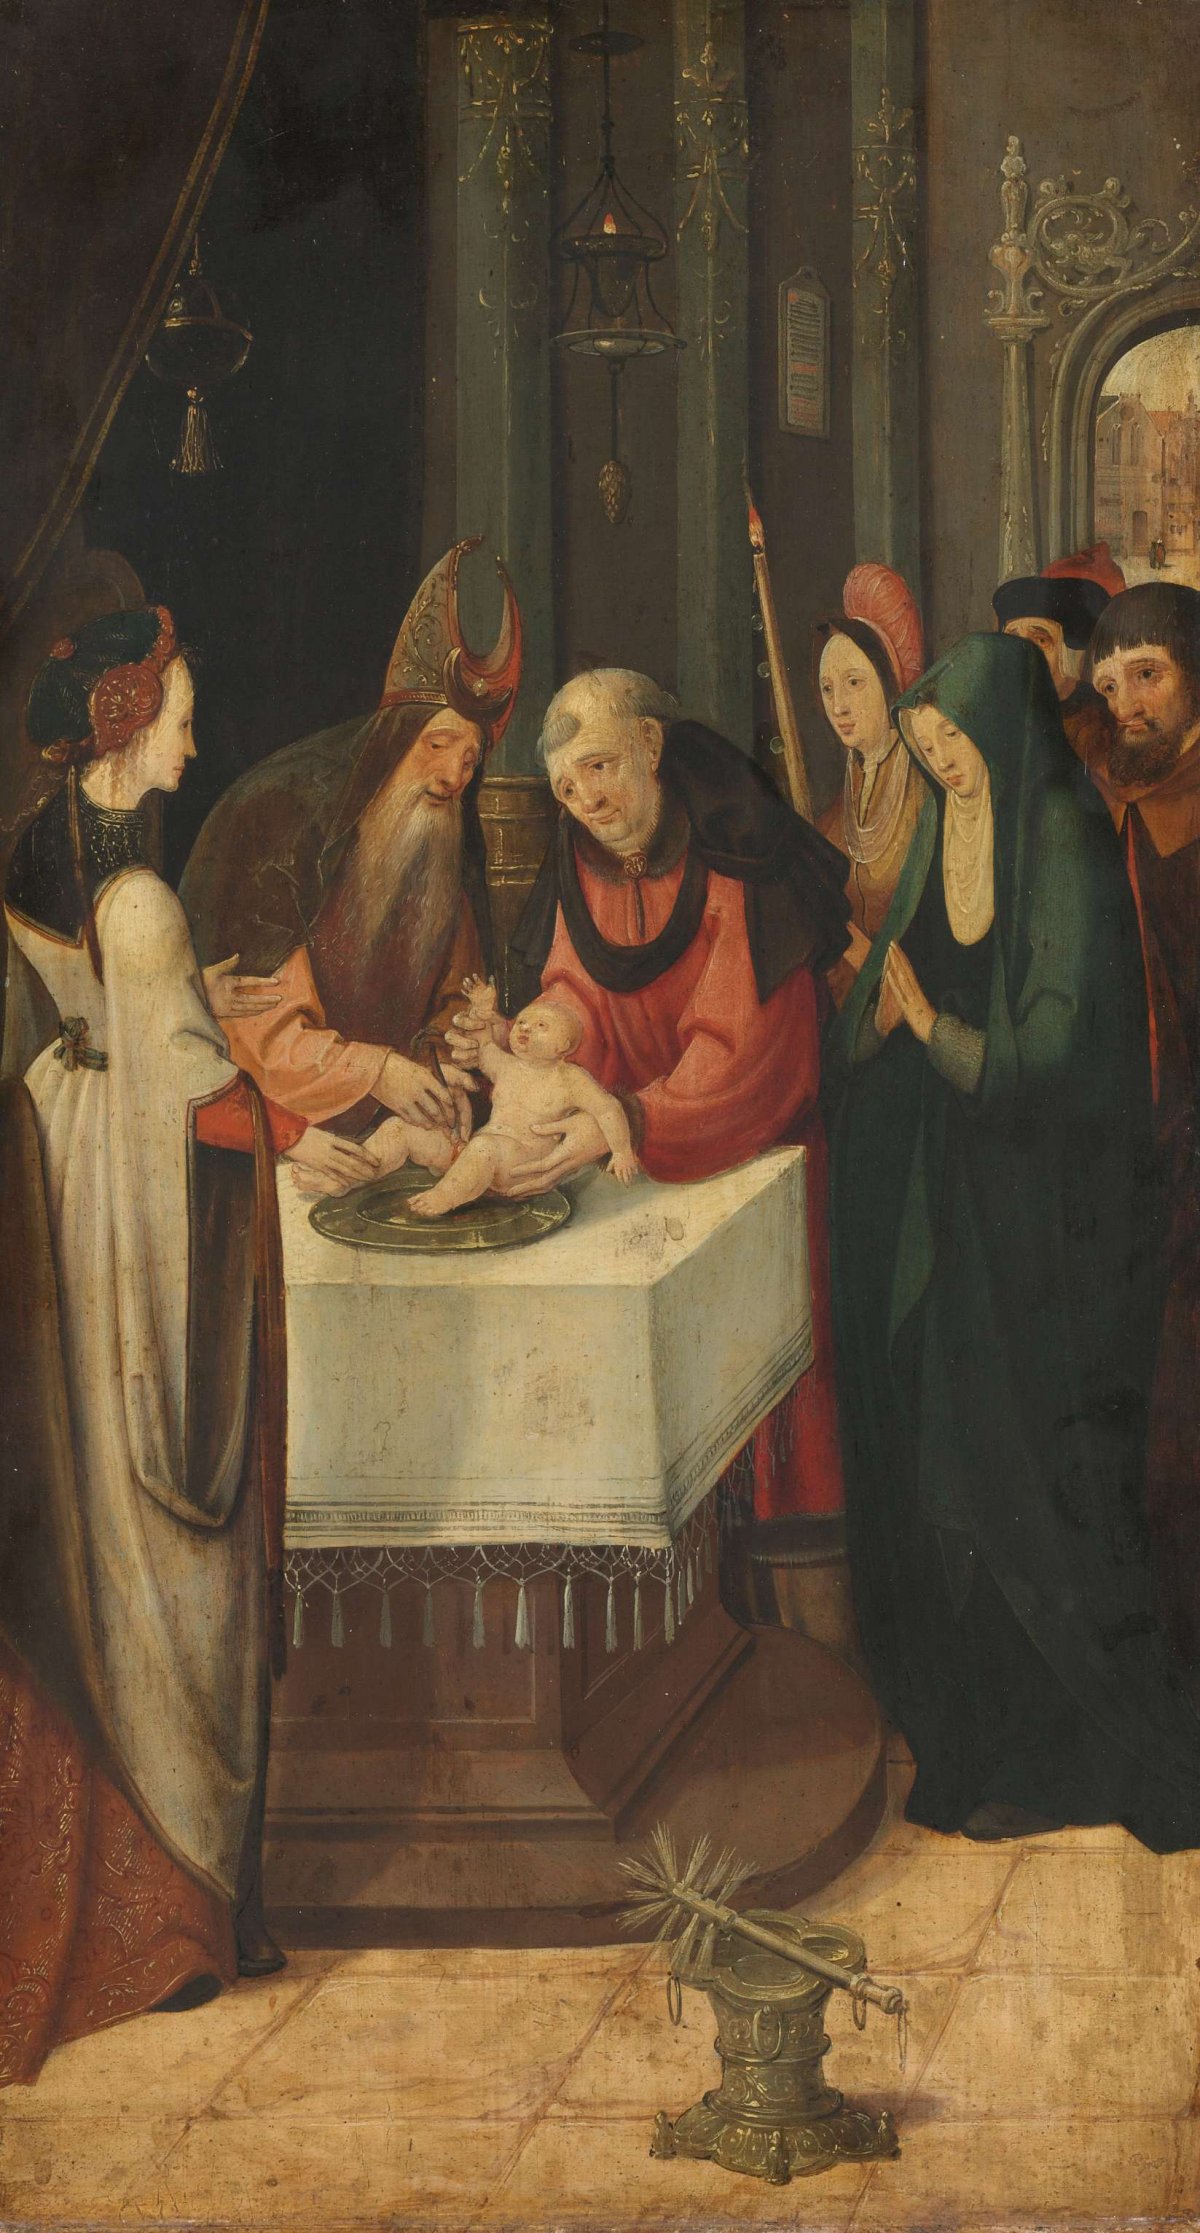 Circumcision of Christ, Left Wing of an Altarpiece, on verso is the Virgin from an Annunciation scene, Pseudo Jan Wellens de Cock, c. 1515 - c. 1525